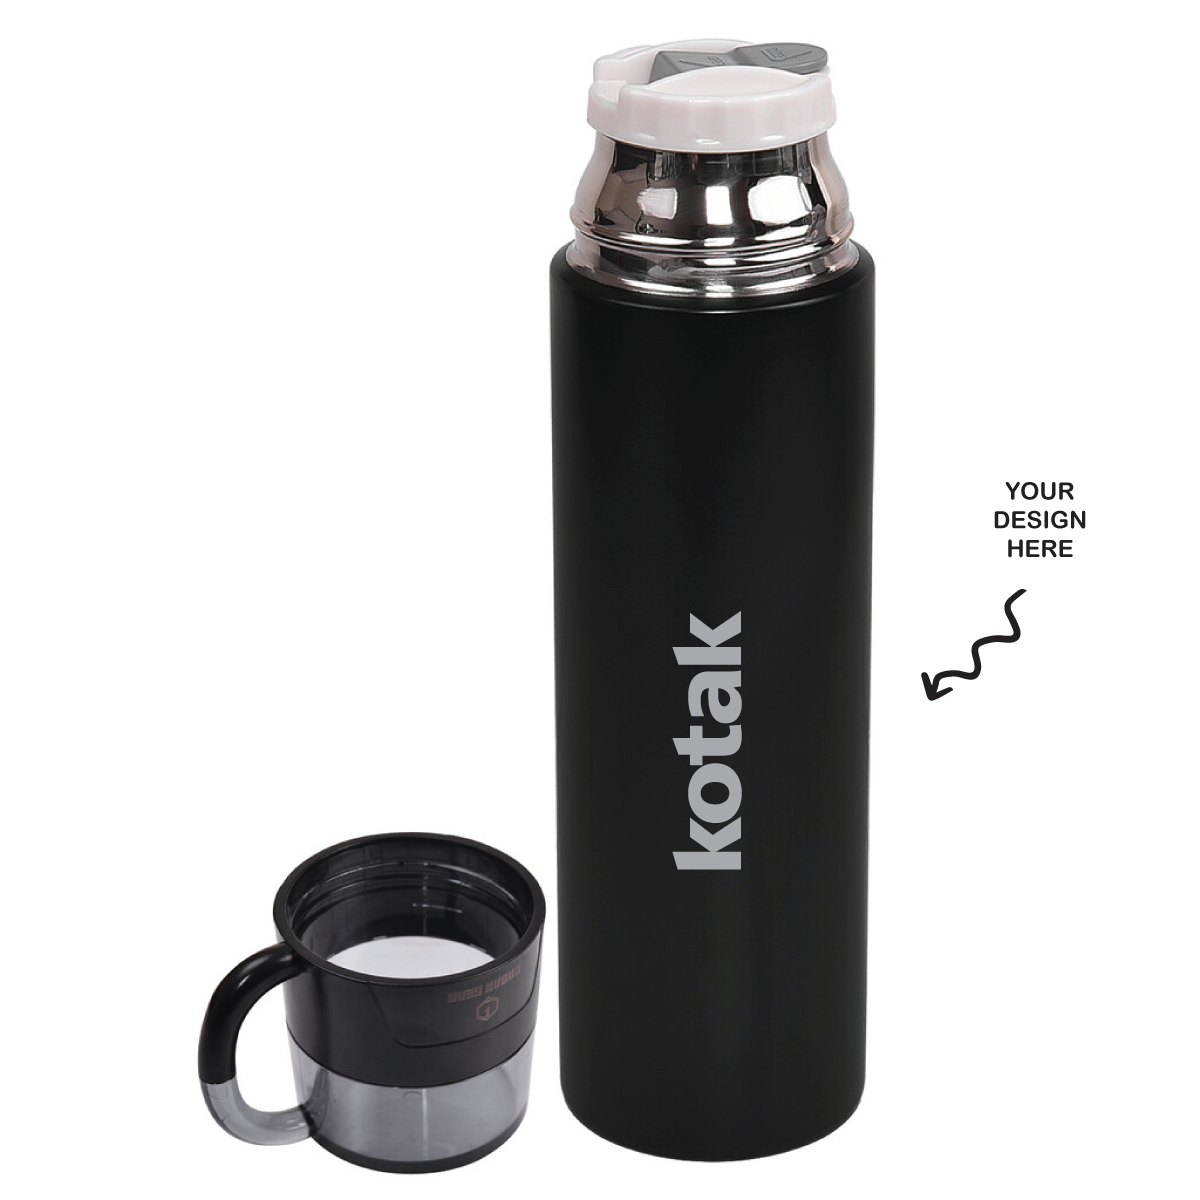 Personalized Engraved Hot and Cold Sports Bottle Cloud - For Return Gift, Corporate Gifting, Office or Personal Use